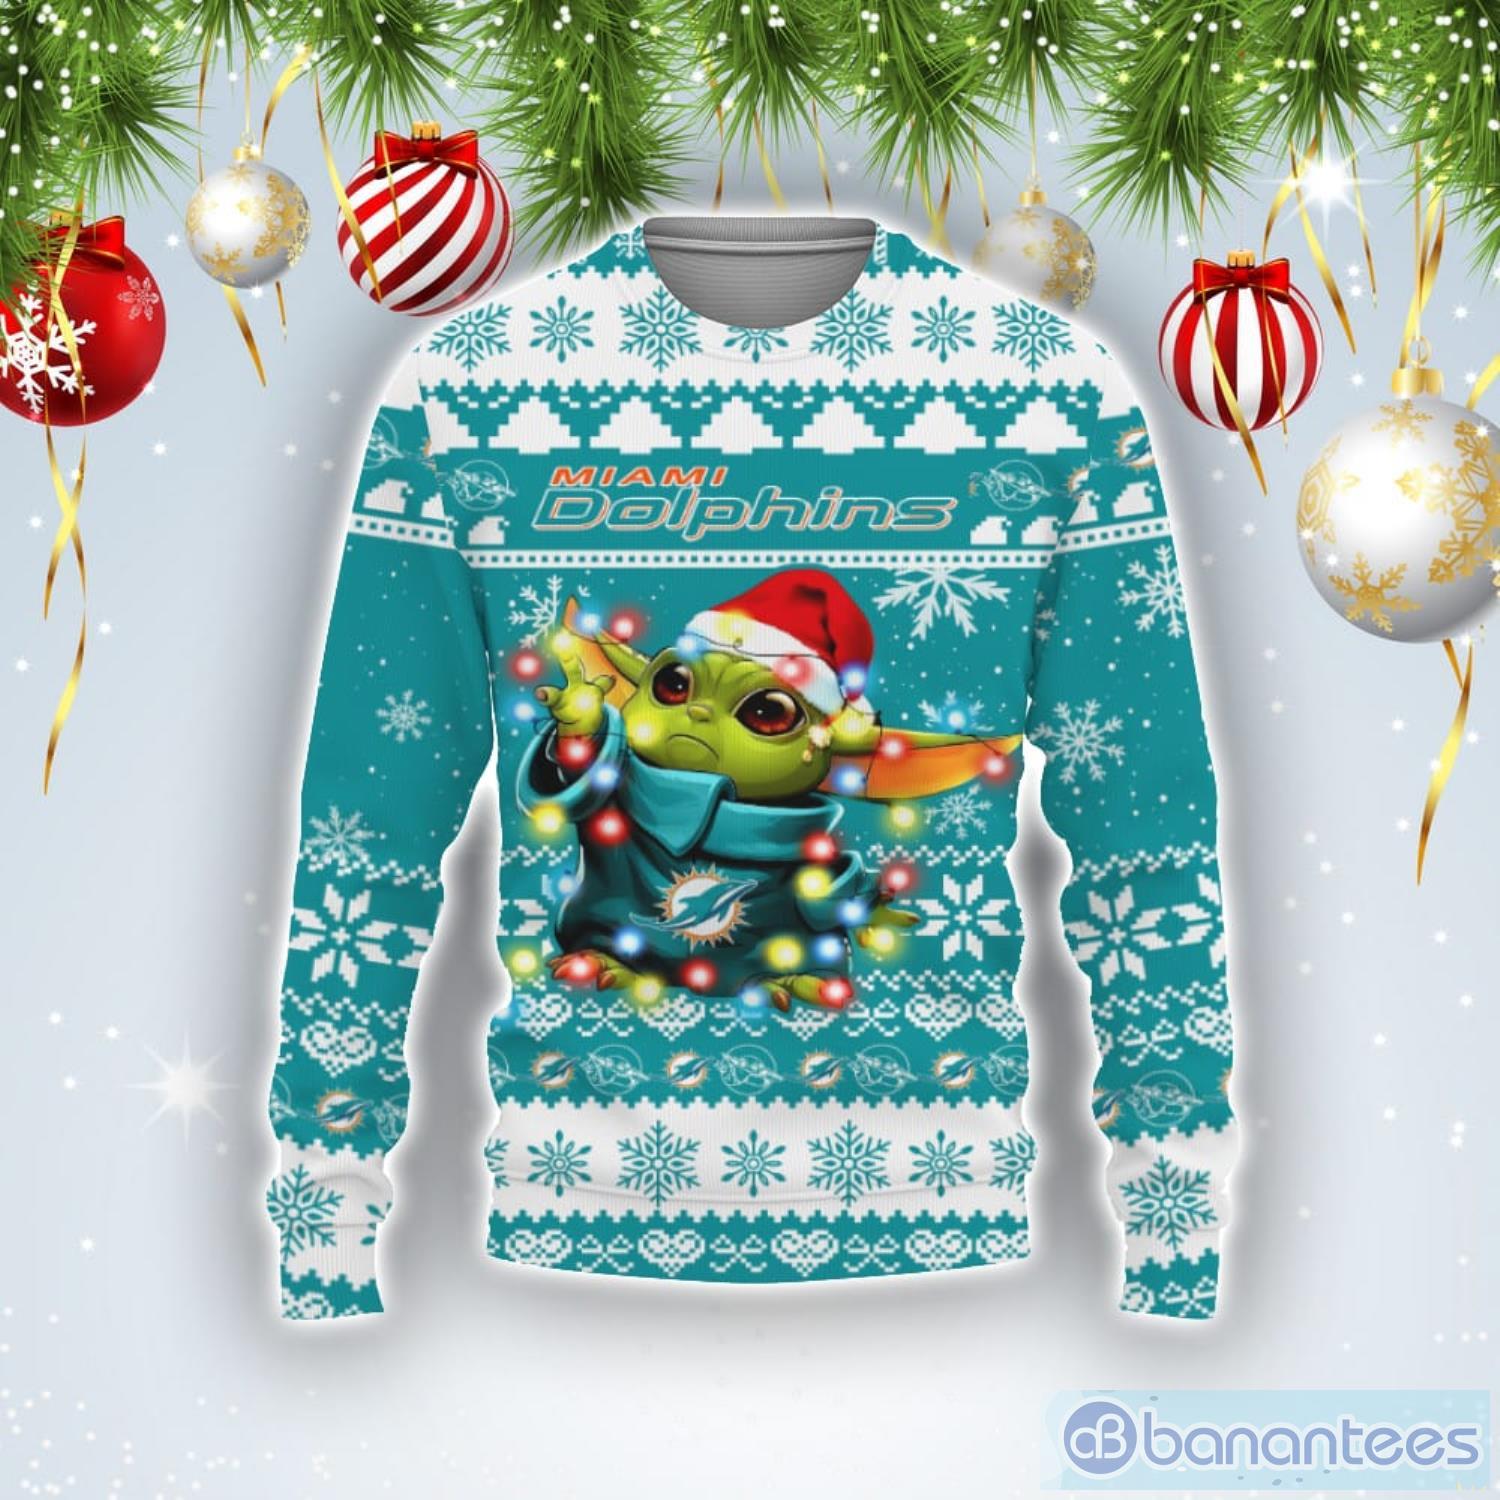 Miami Dolphins Baby Yoda Star Wars Sports Football American Ugly Christmas Sweater Product Photo 1